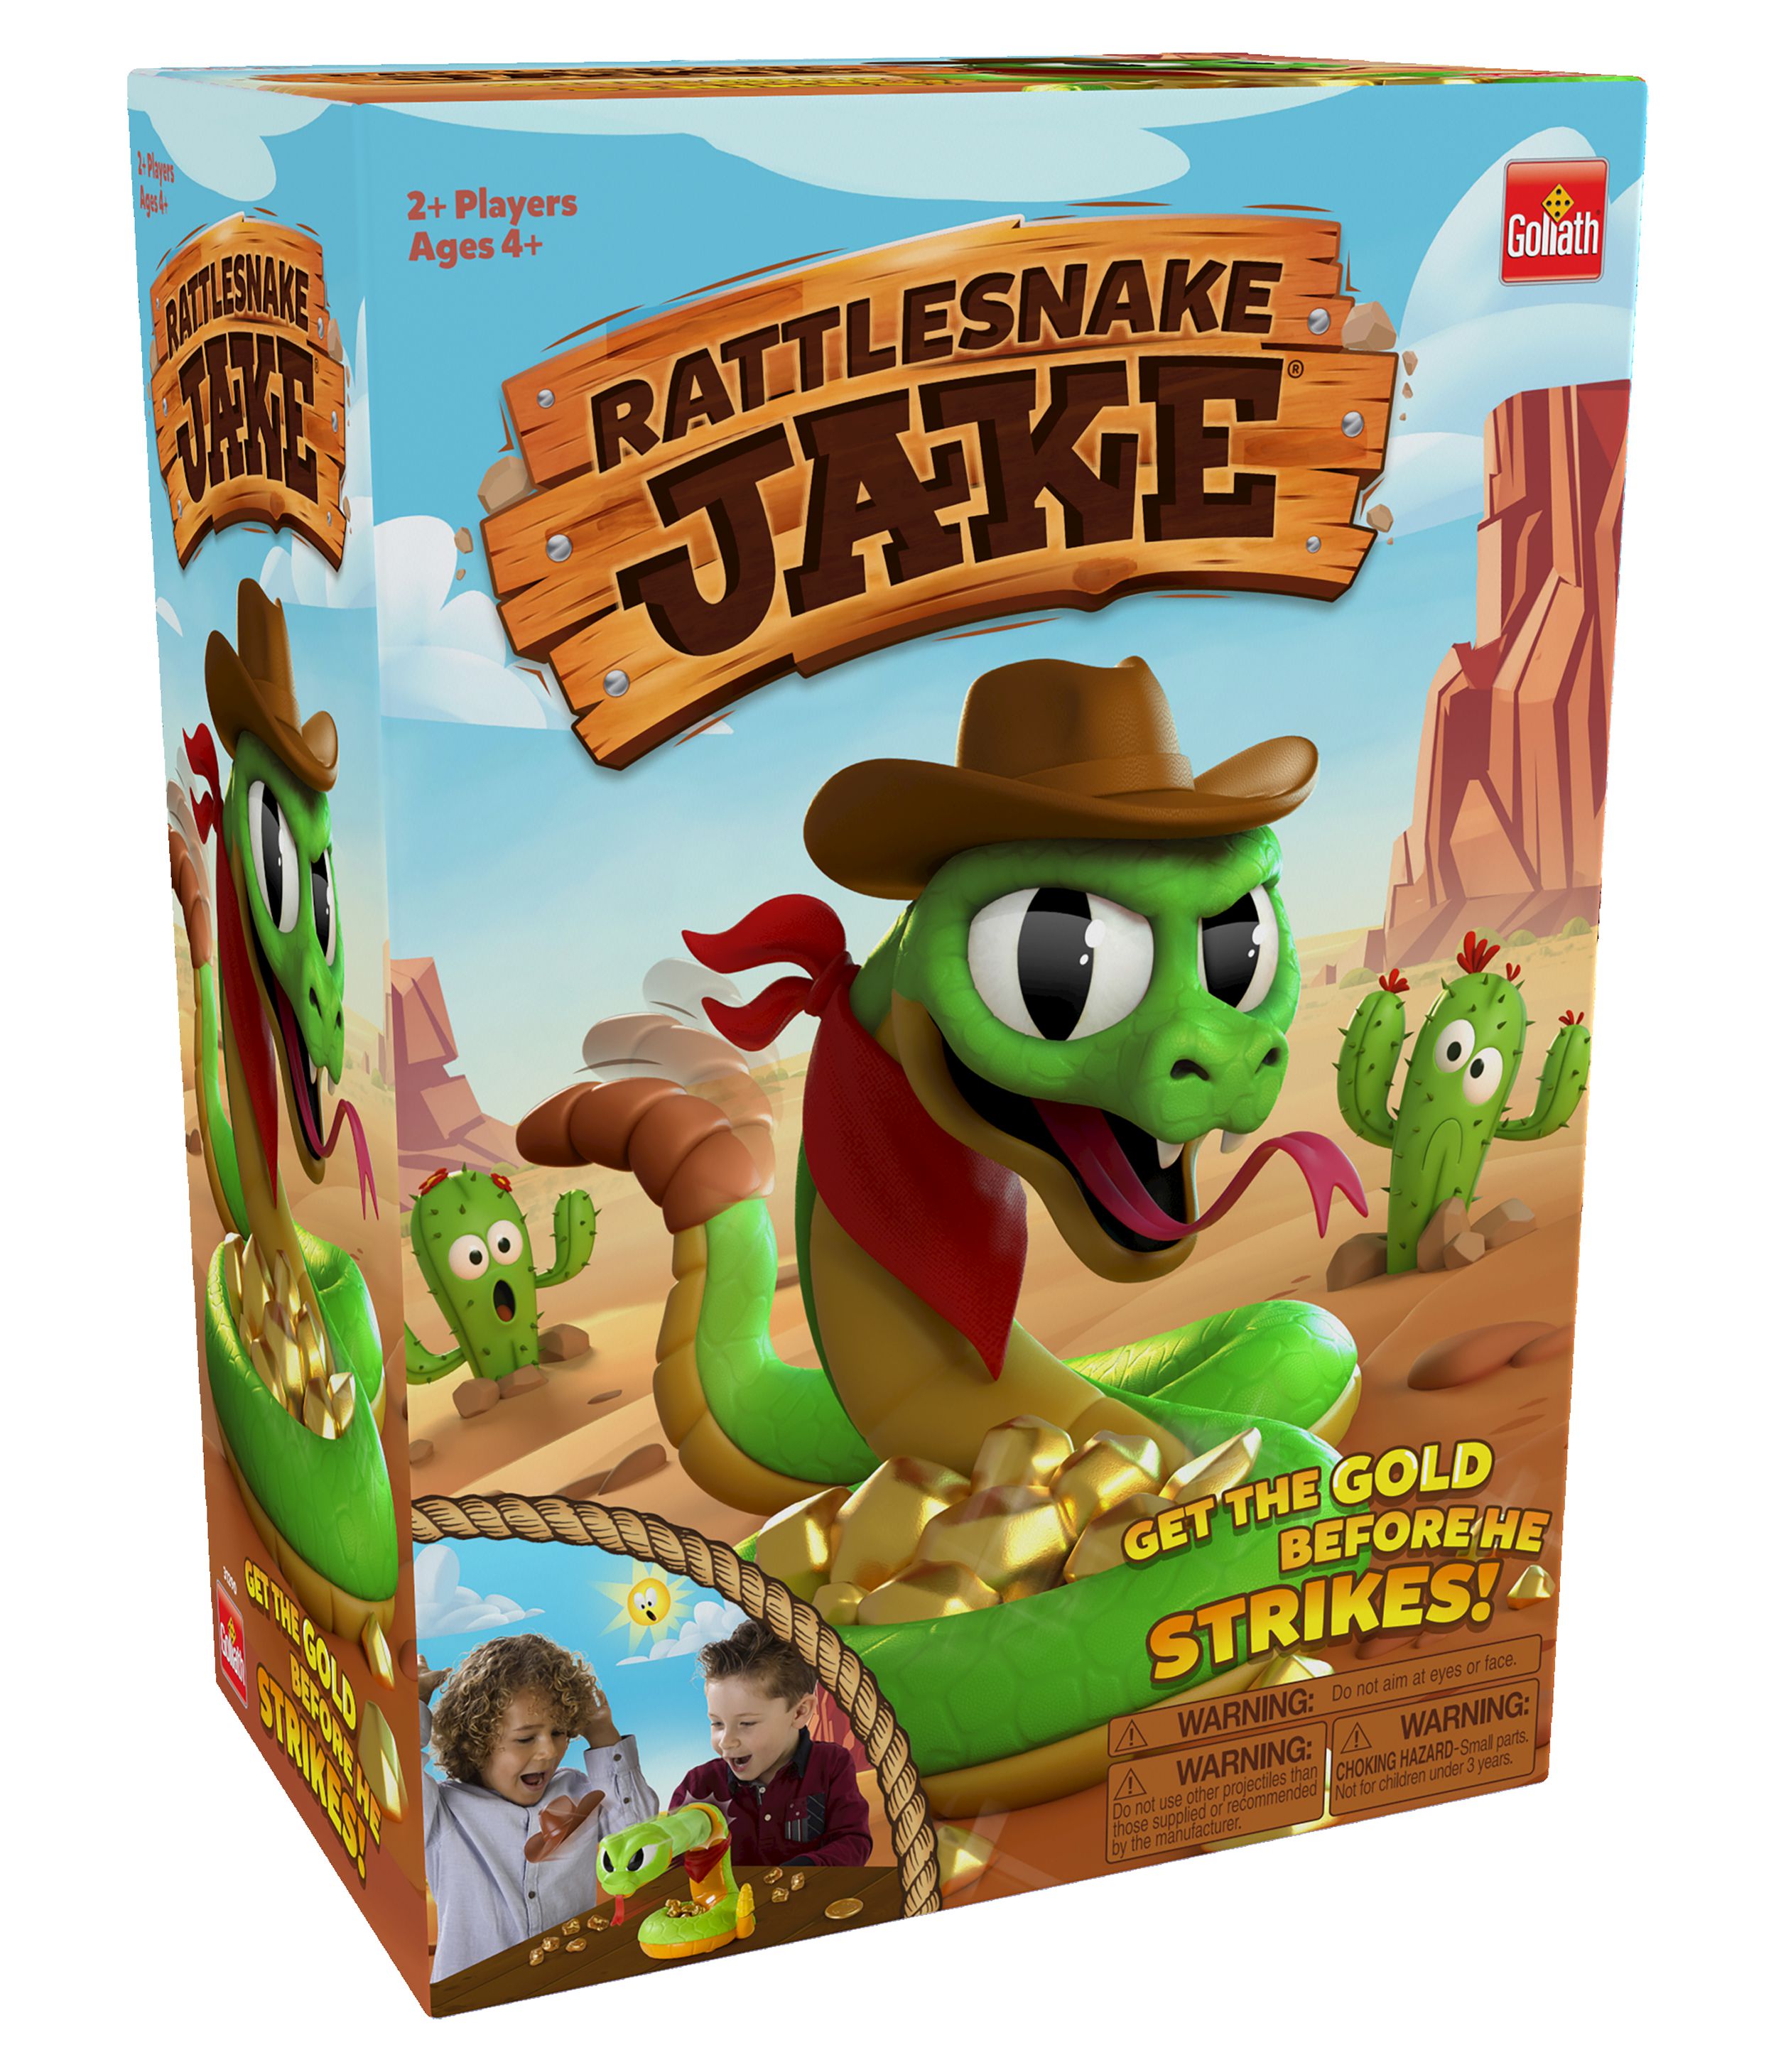 Goliath Rattlesnake Jake - Get The Gold before He Strikes! Board Game - image 1 of 8